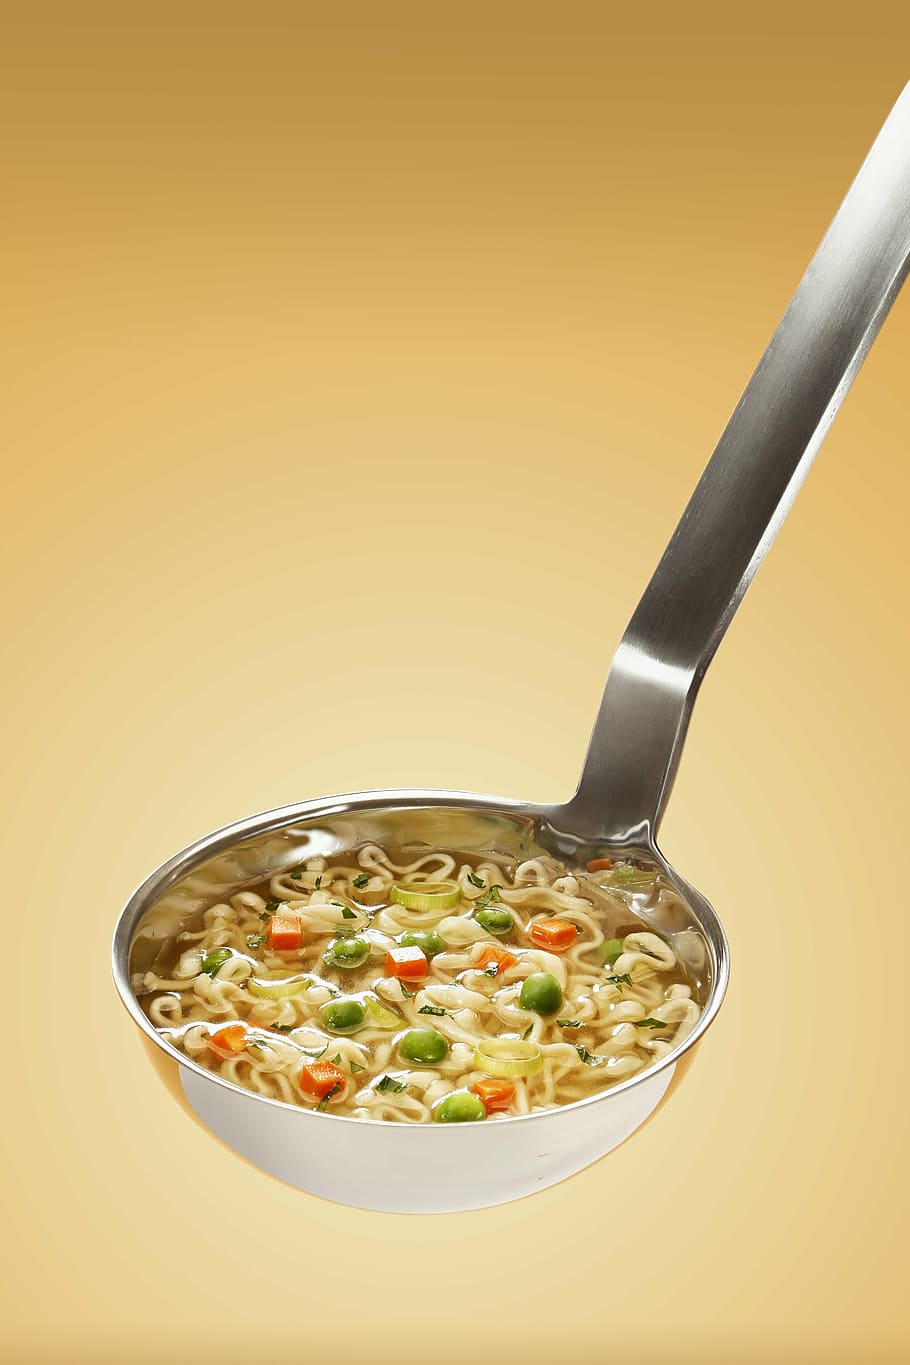 noodles in spoon, delicious, food, healthy, ladle, meal, noodles, soup, vegetables, food and drink